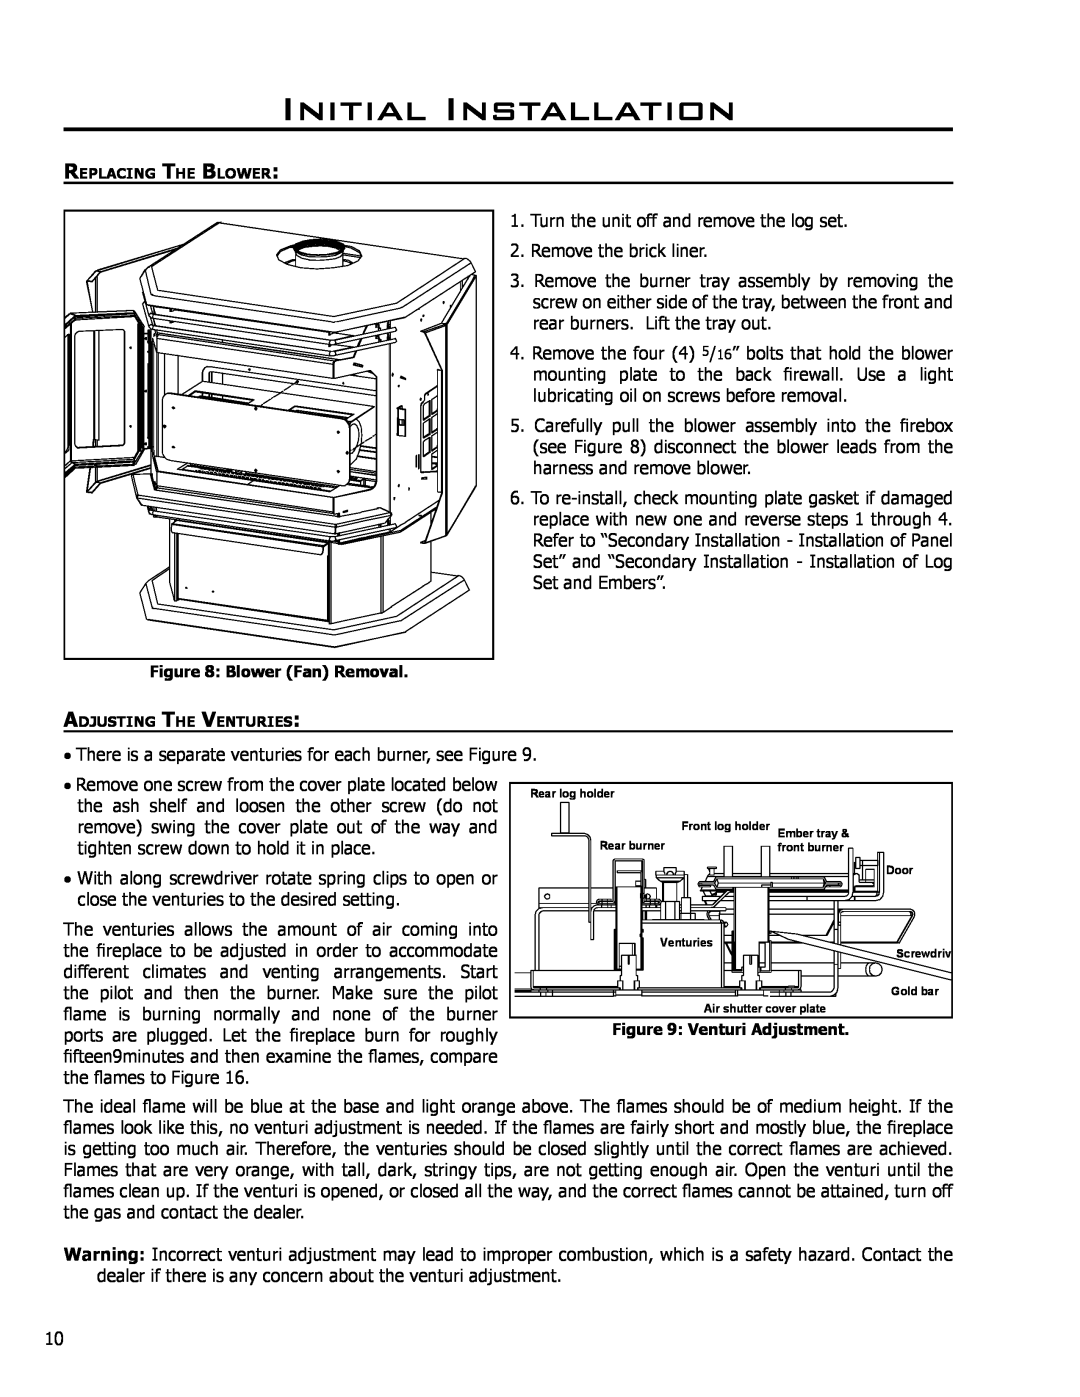 Enviro EG40 BV owner manual Initial Installation, Turn the unit off and remove the log set 